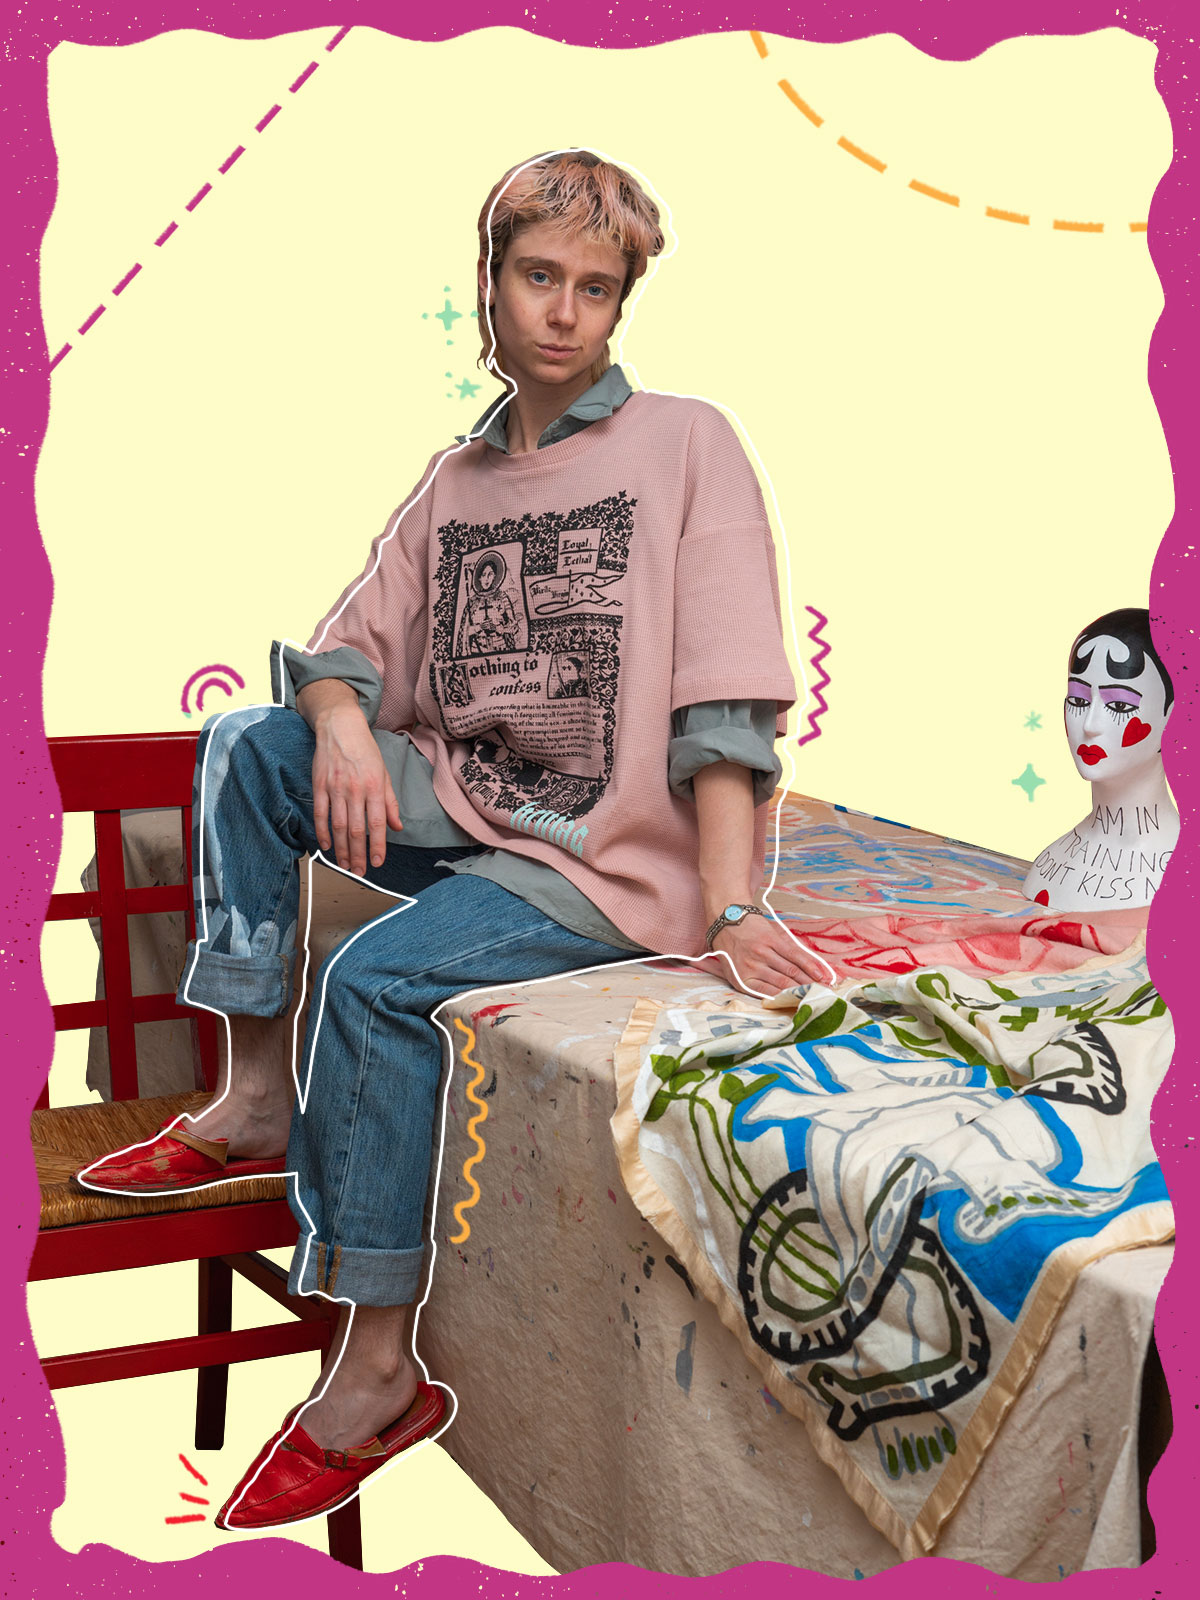 Person sitting on table with fabric and mannequin head with drawn graphics around them